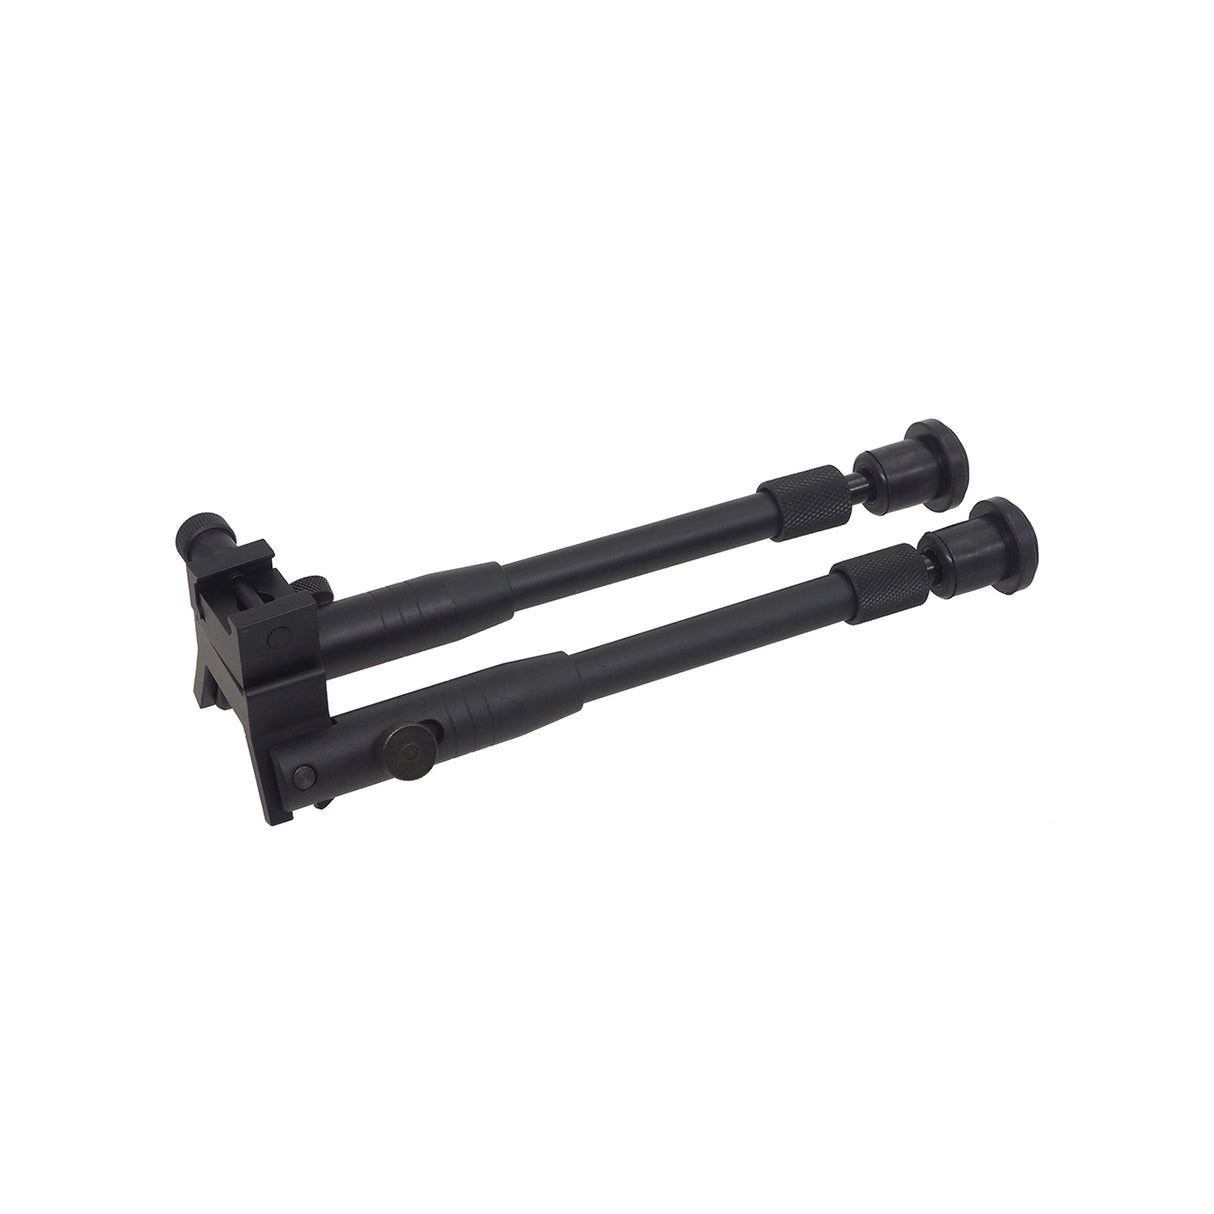 WELL Replacement Bipod for MB4401 Series ( WELL-AC005 )